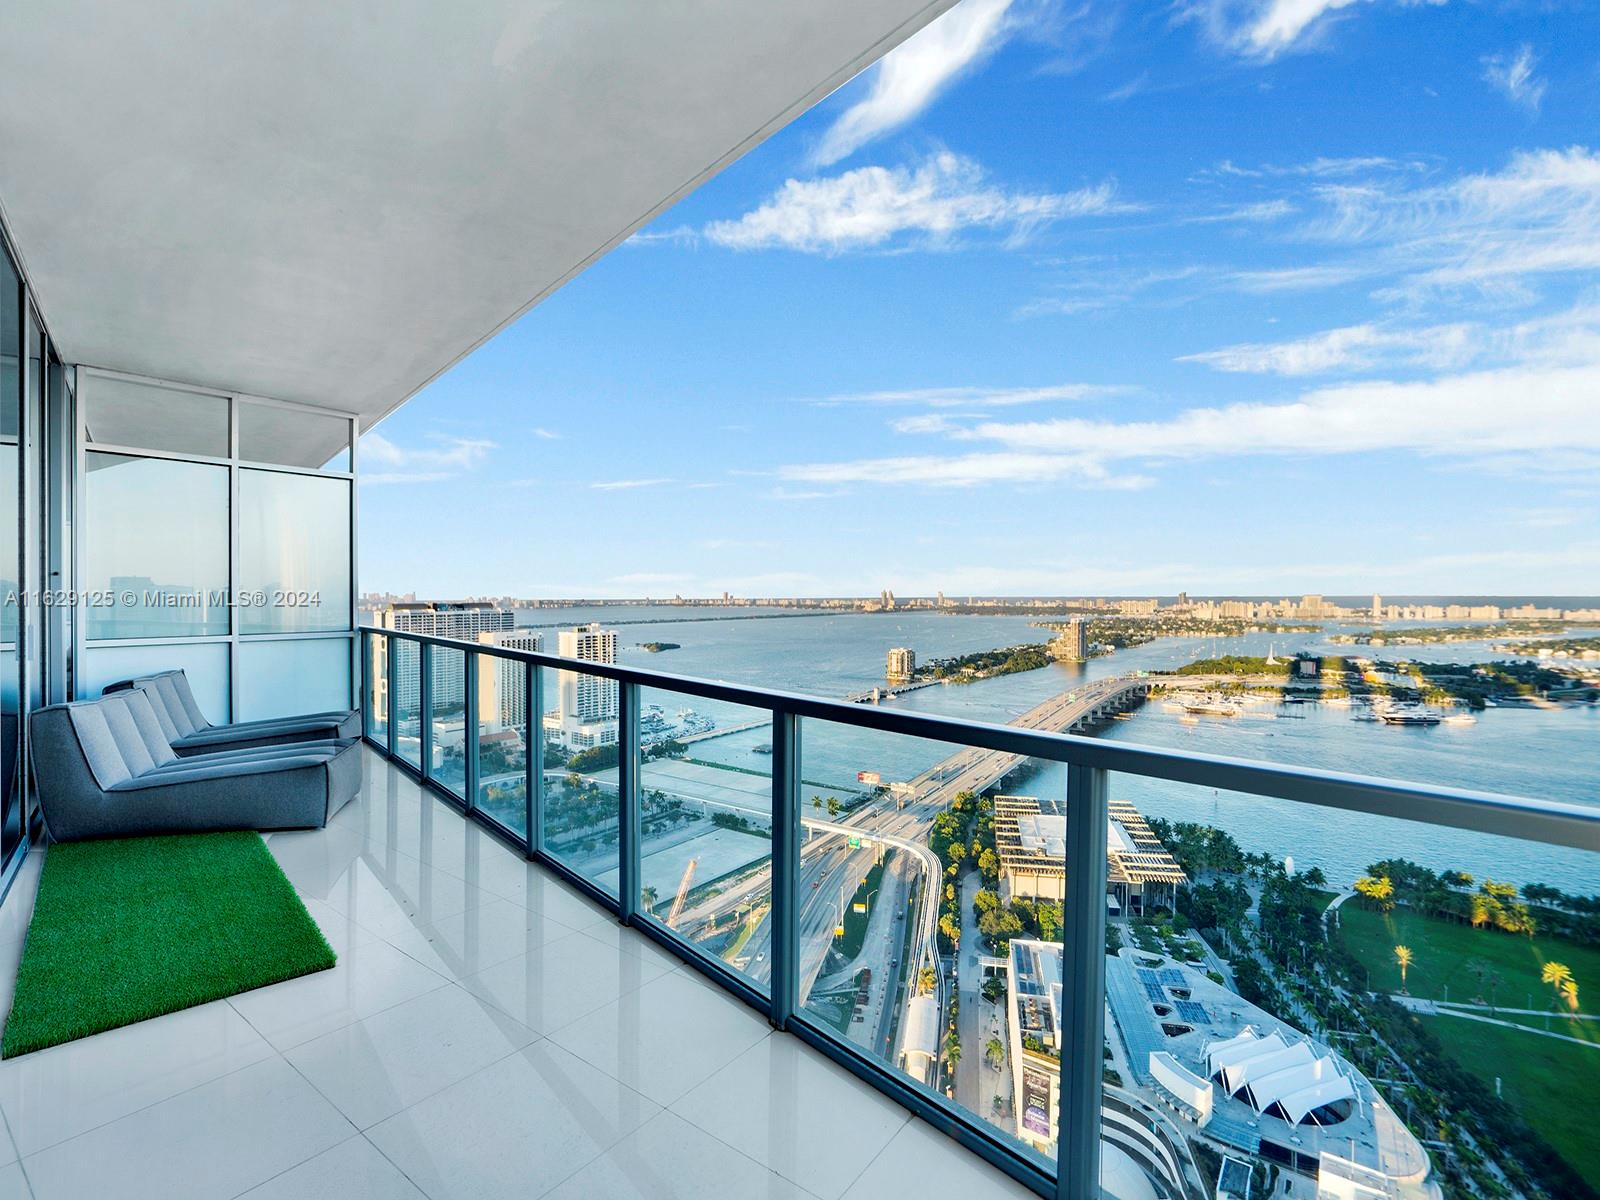 This 2106 sq/ft 3BD/2.5BA is one of the most sought-after lines at Marquis Miami Residences. Enjoy stunning views of Biscayne Bay, Miami Beach & The Atlantic Ocean from the 40th floor of this beautifully furnished unit. The unit offers private elevator entry, neutral white floors. Marquis Residences is located in the heart of Miami just steps from Museum Park, PAMM, Adrienne Arsht Performing Arts, South Beach, Midtown, & Brickell. Enjoy sunrise lap pool or bask in the afternoon pool. Grab a workout in the newly updated gym or just relax and enjoy the poolside restaurant and bar.